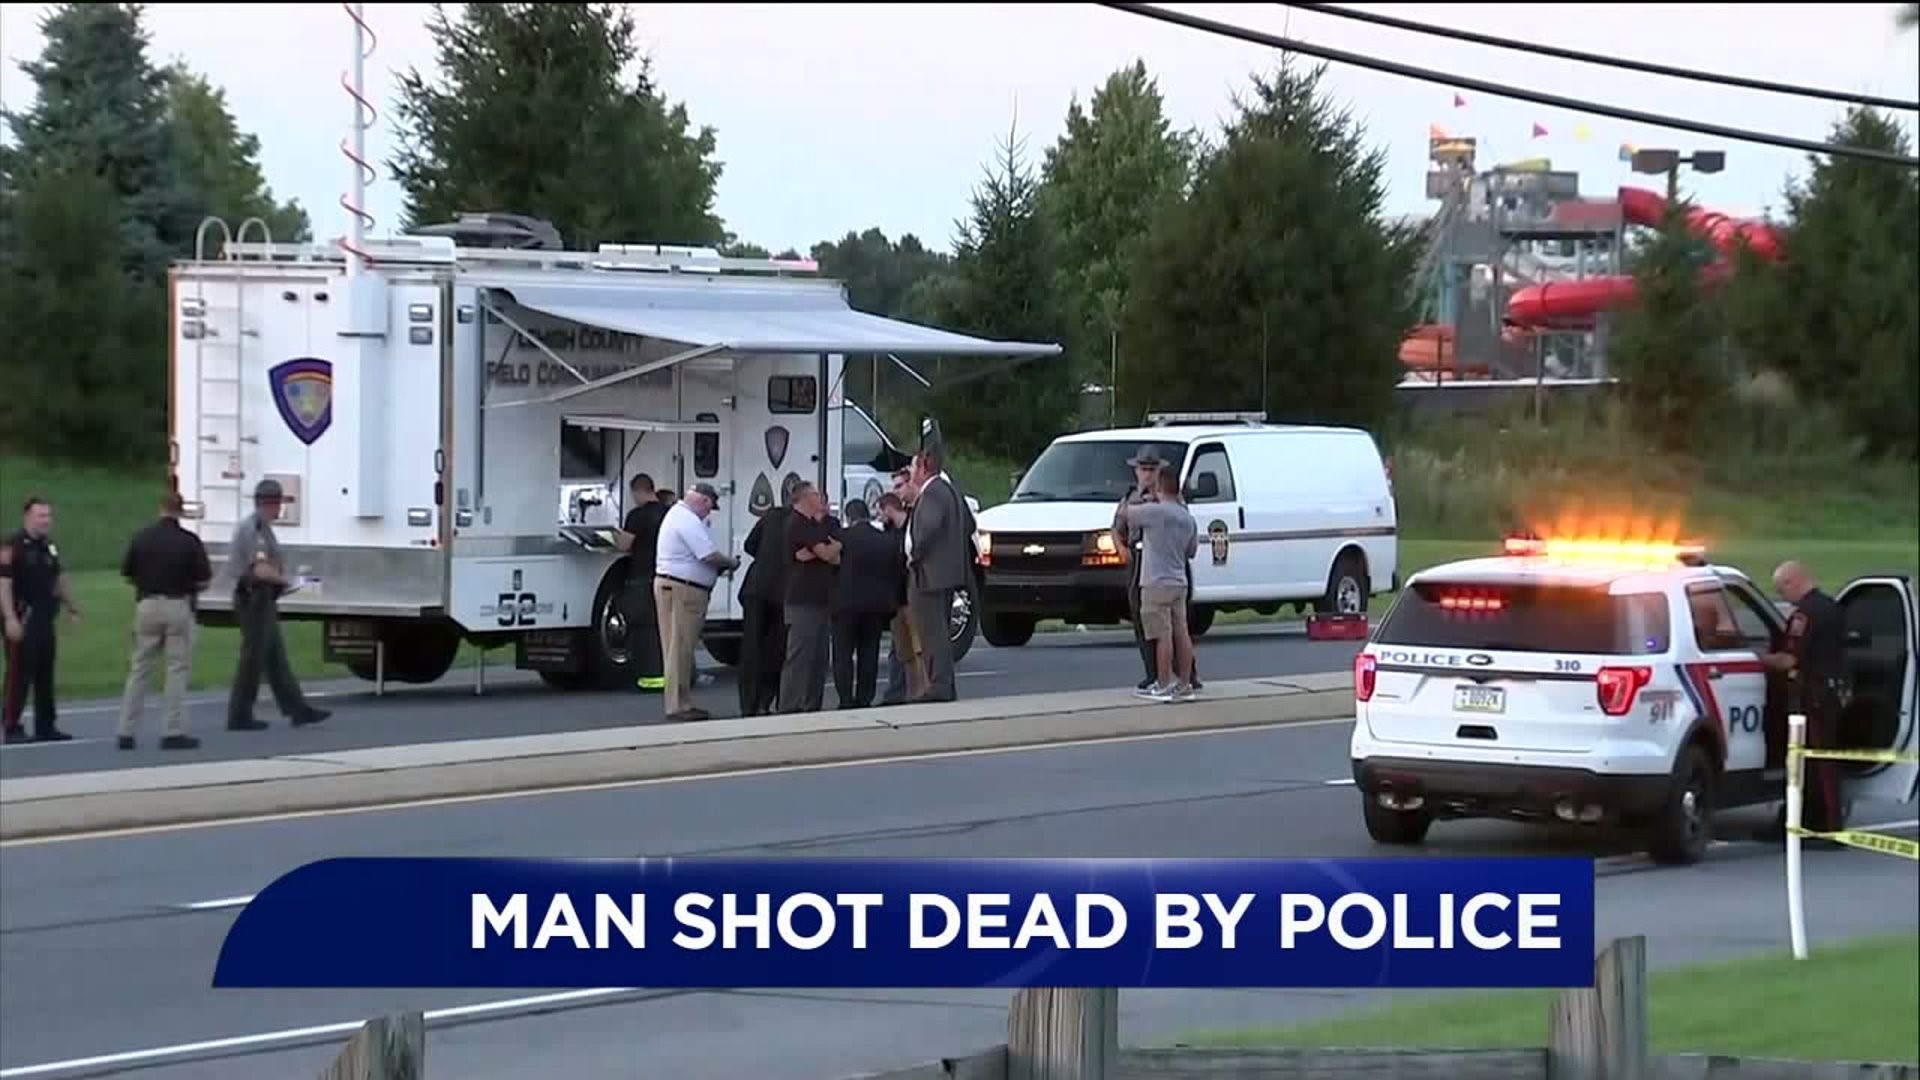 State Police Investigating Man Shot Dead by Police Officer near Allentown